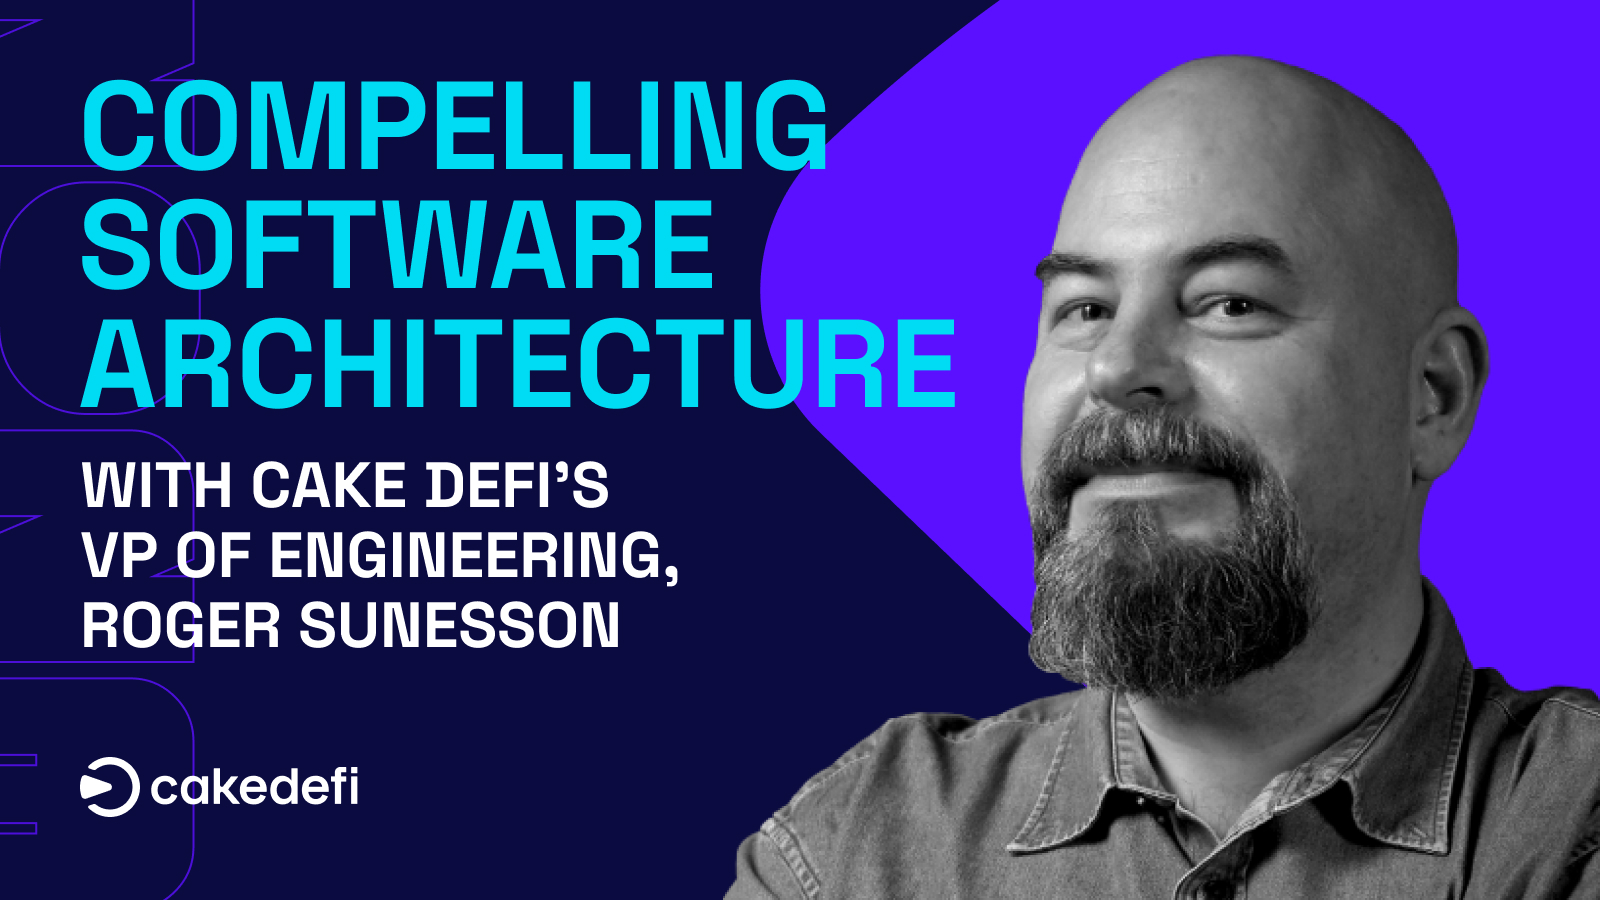 Revolutionize Your Software Architecture with Cake DeFi's VP of Engineering, Roger Sunesson